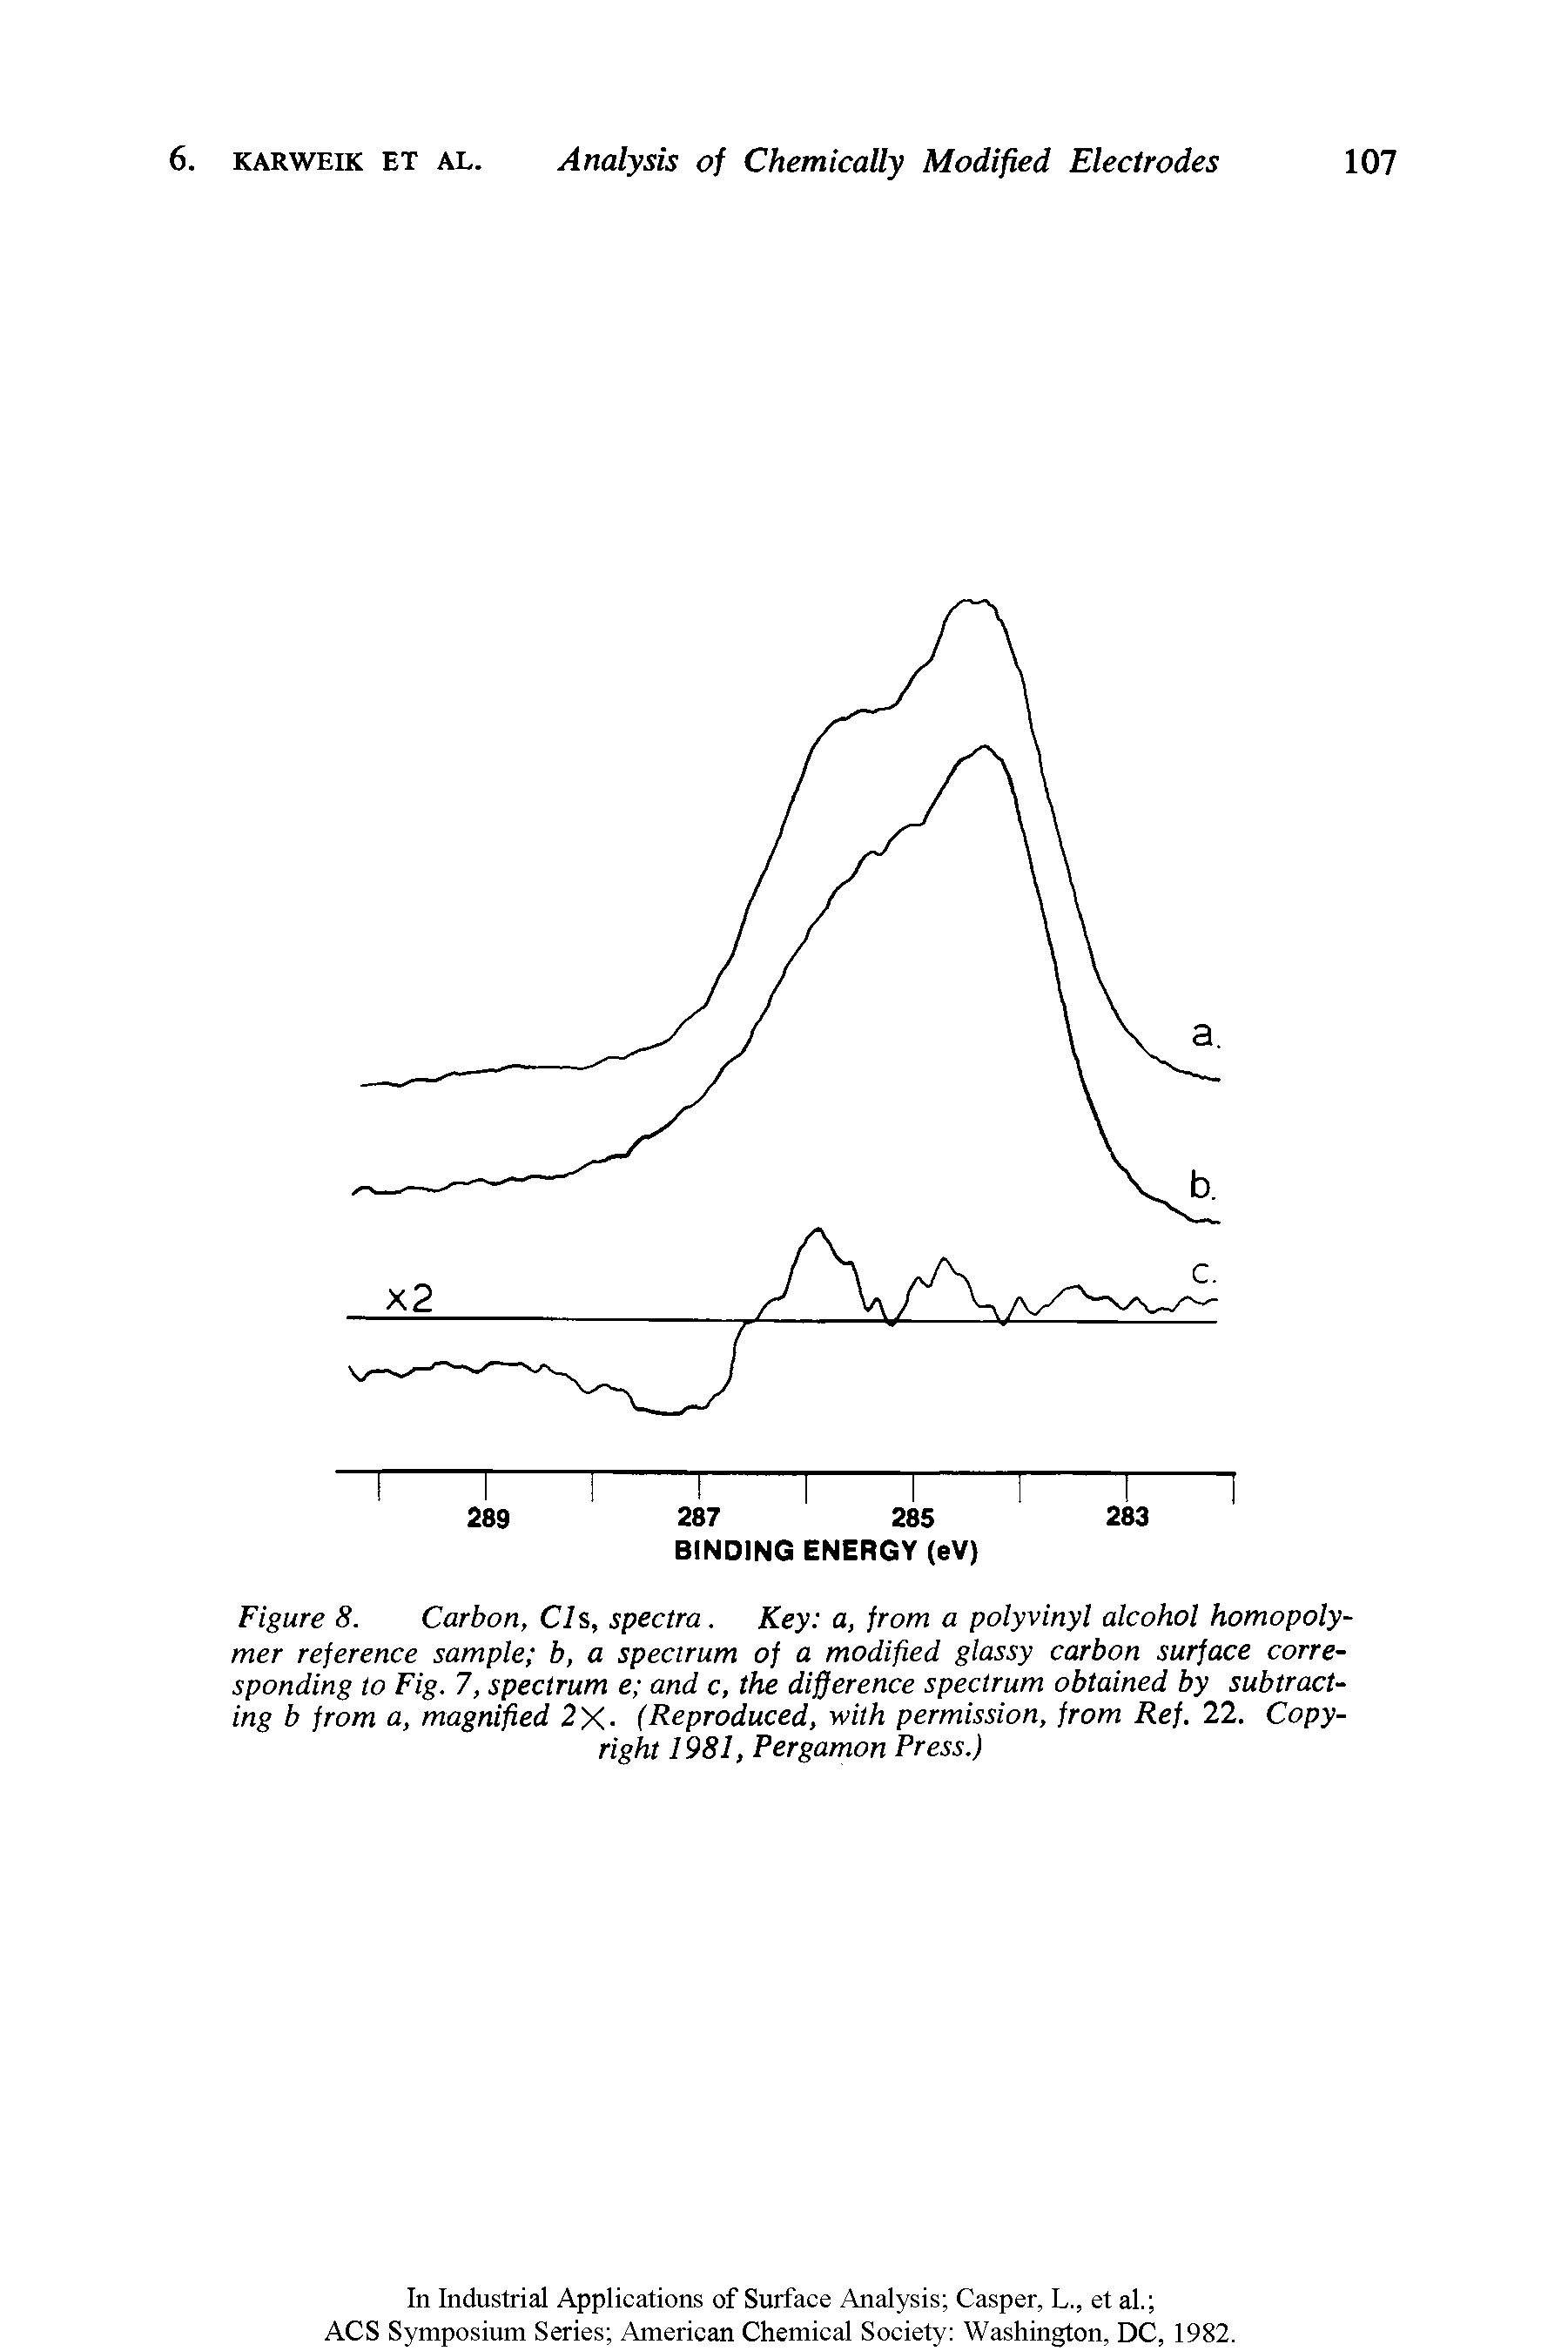 Figure 8. Carbon, Cls, spectra. Key a, from a polyvinyl alcohol homopolymer reference sample b, a spectrum of a modified glassy carbon surface corresponding to Fig. 7, spectrum e and c, the difference spectrum obtained by subtracting b from a, magnified 2X- (Reproduced, with permission, from Ref. 22. Copyright 1981, Pergamon Press.)...